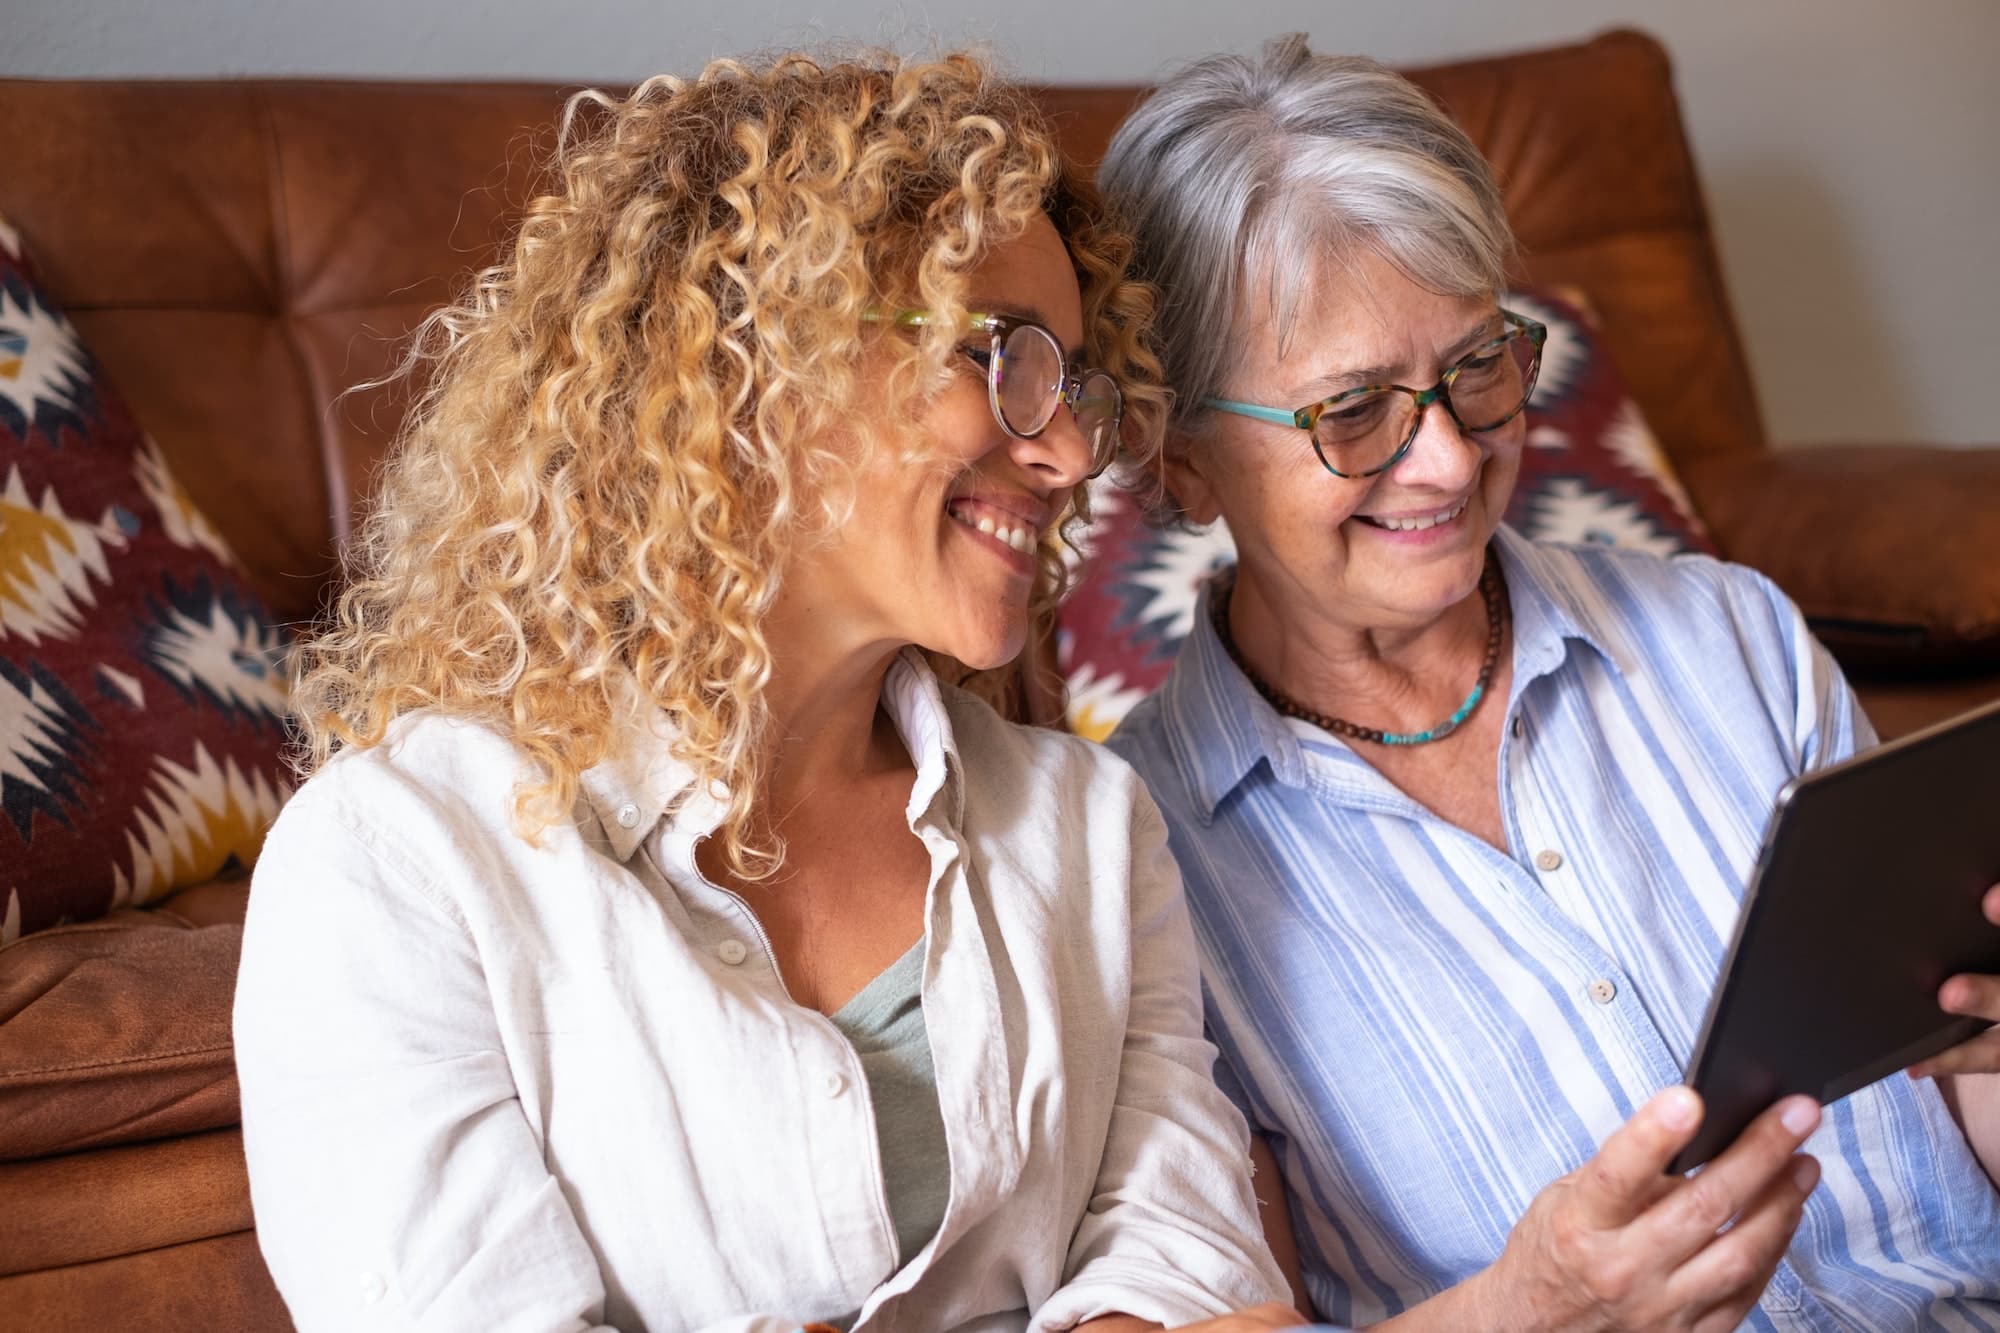 Mother with adult daughter at home having fun together sharing news on digital device